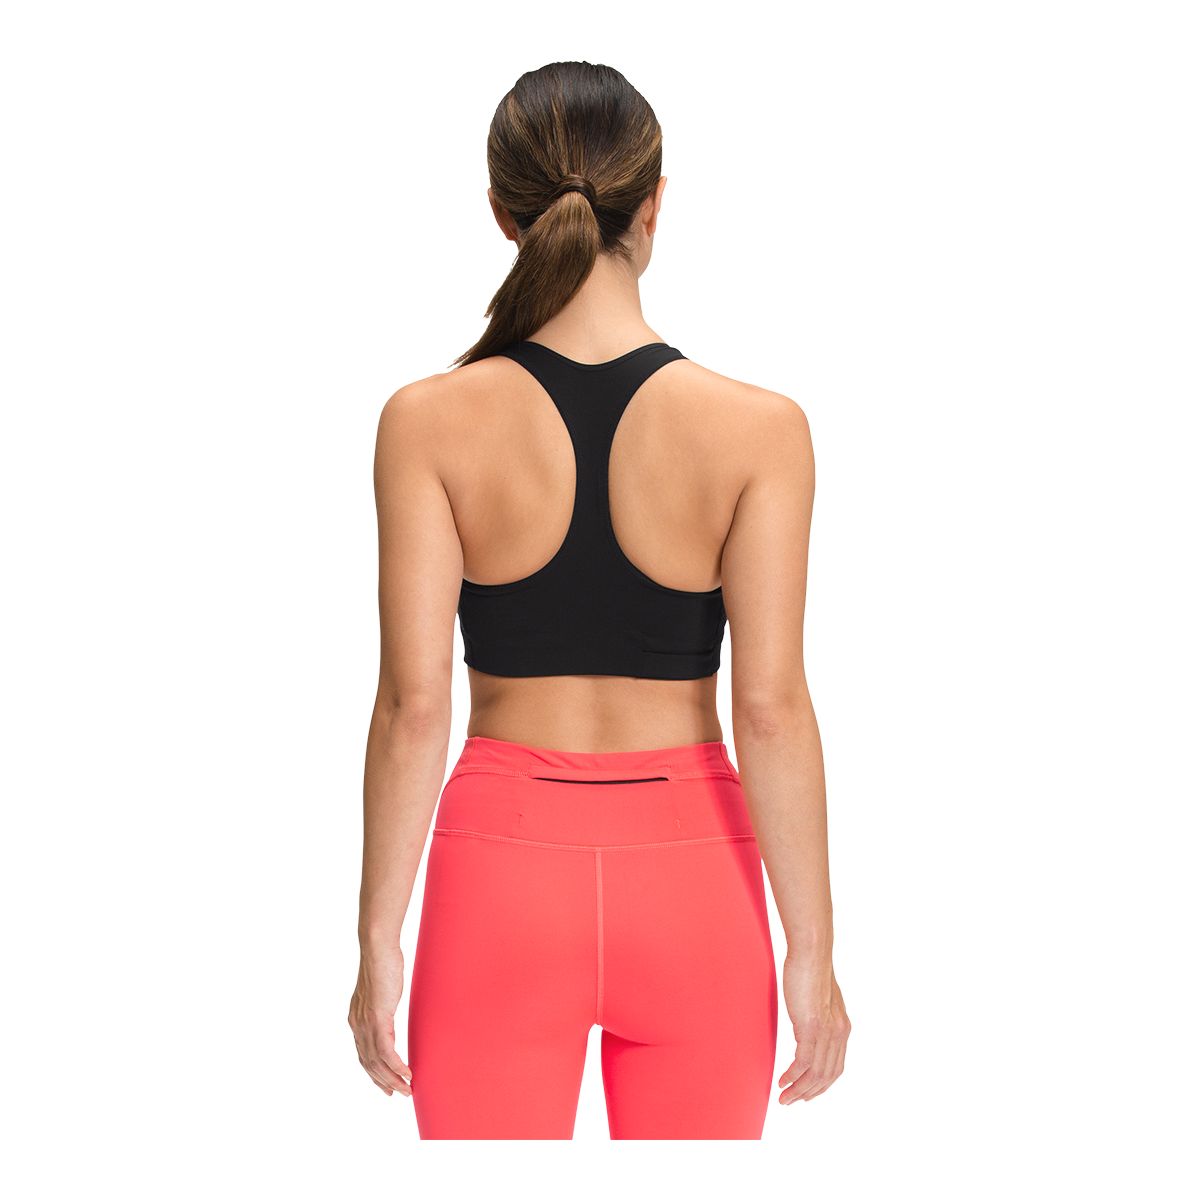 The North Face Lead In Bralette Sz XS Slate Rose Sports Bra Yoga Hiking New  $59